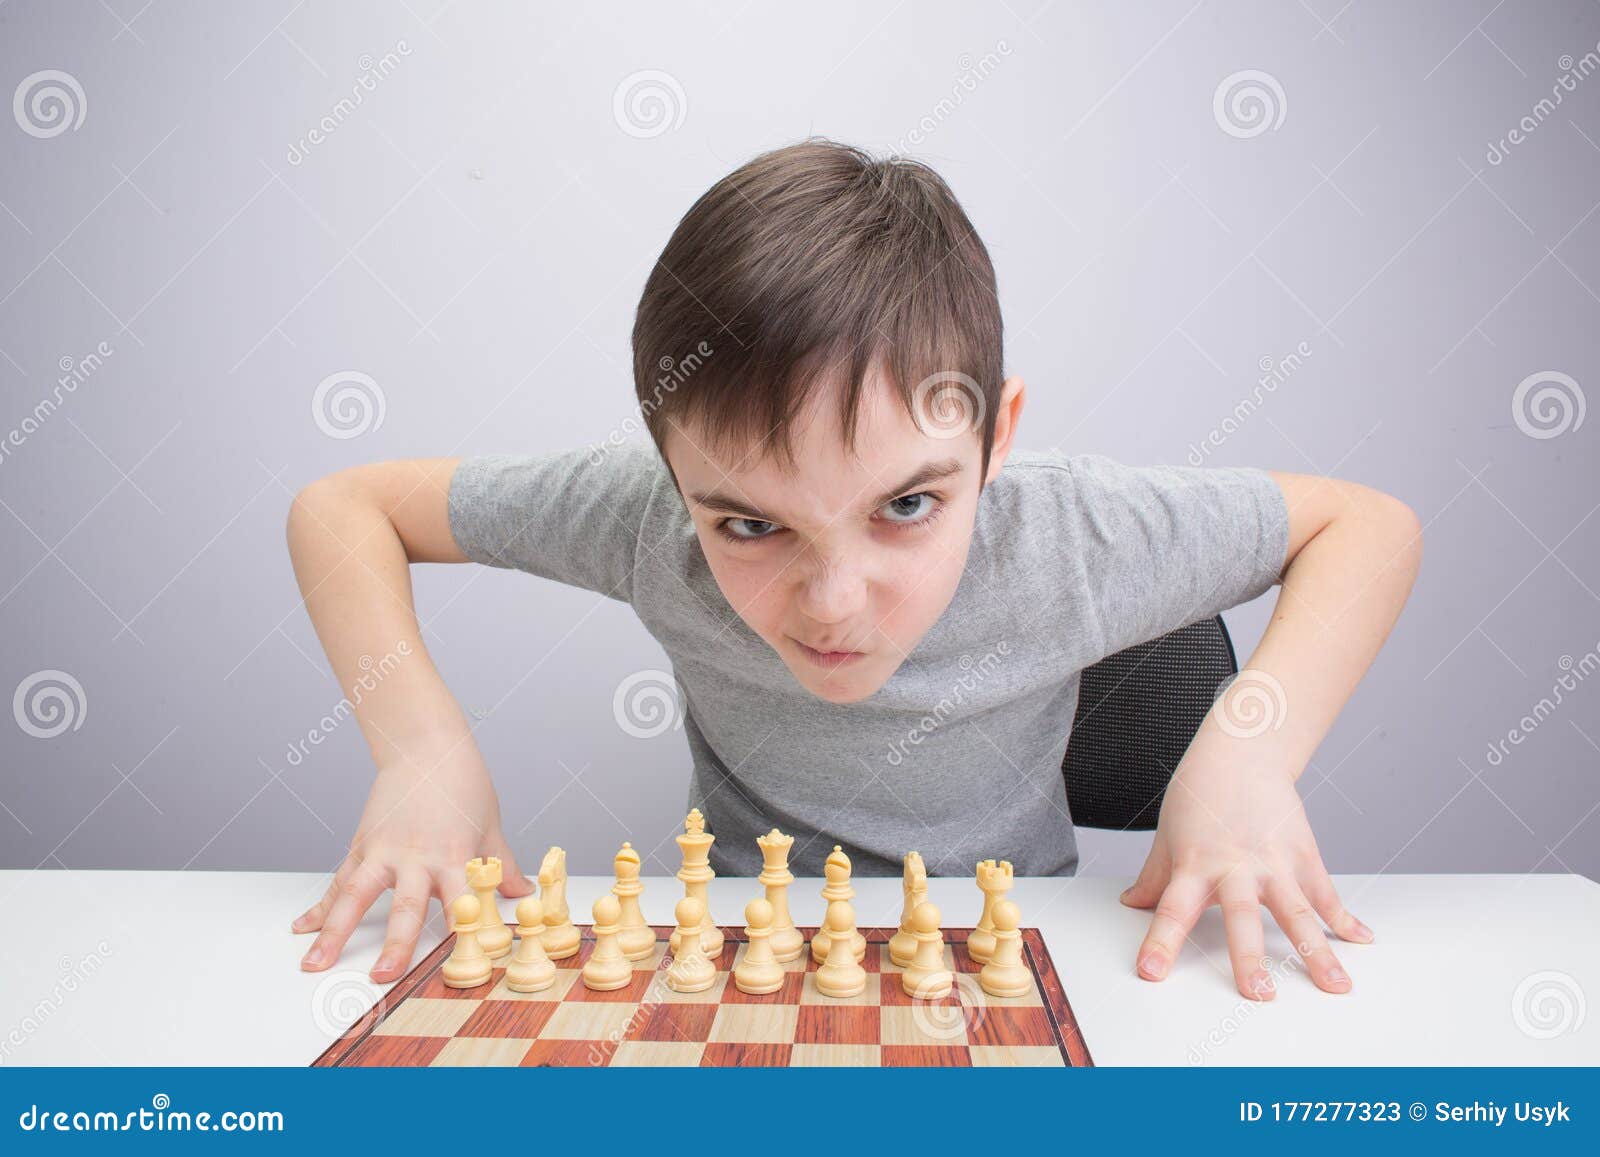 Playing chess online. Studying how to play chess online. Stock